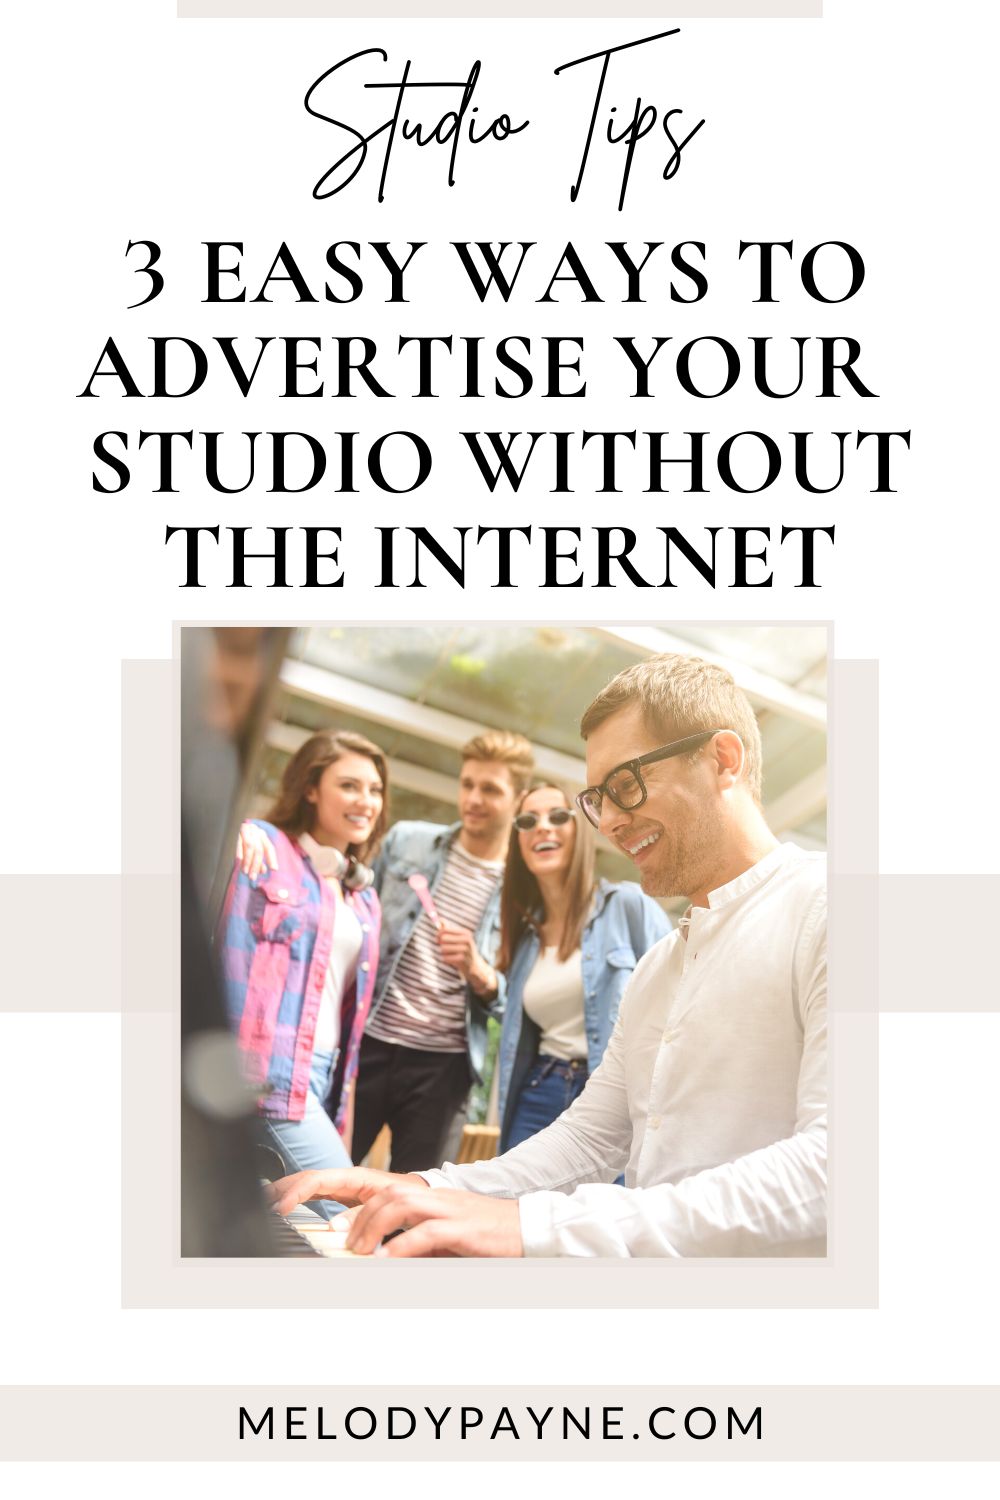 3 Easy Ways to Advertise Your Piano Studio Without Using the Internet